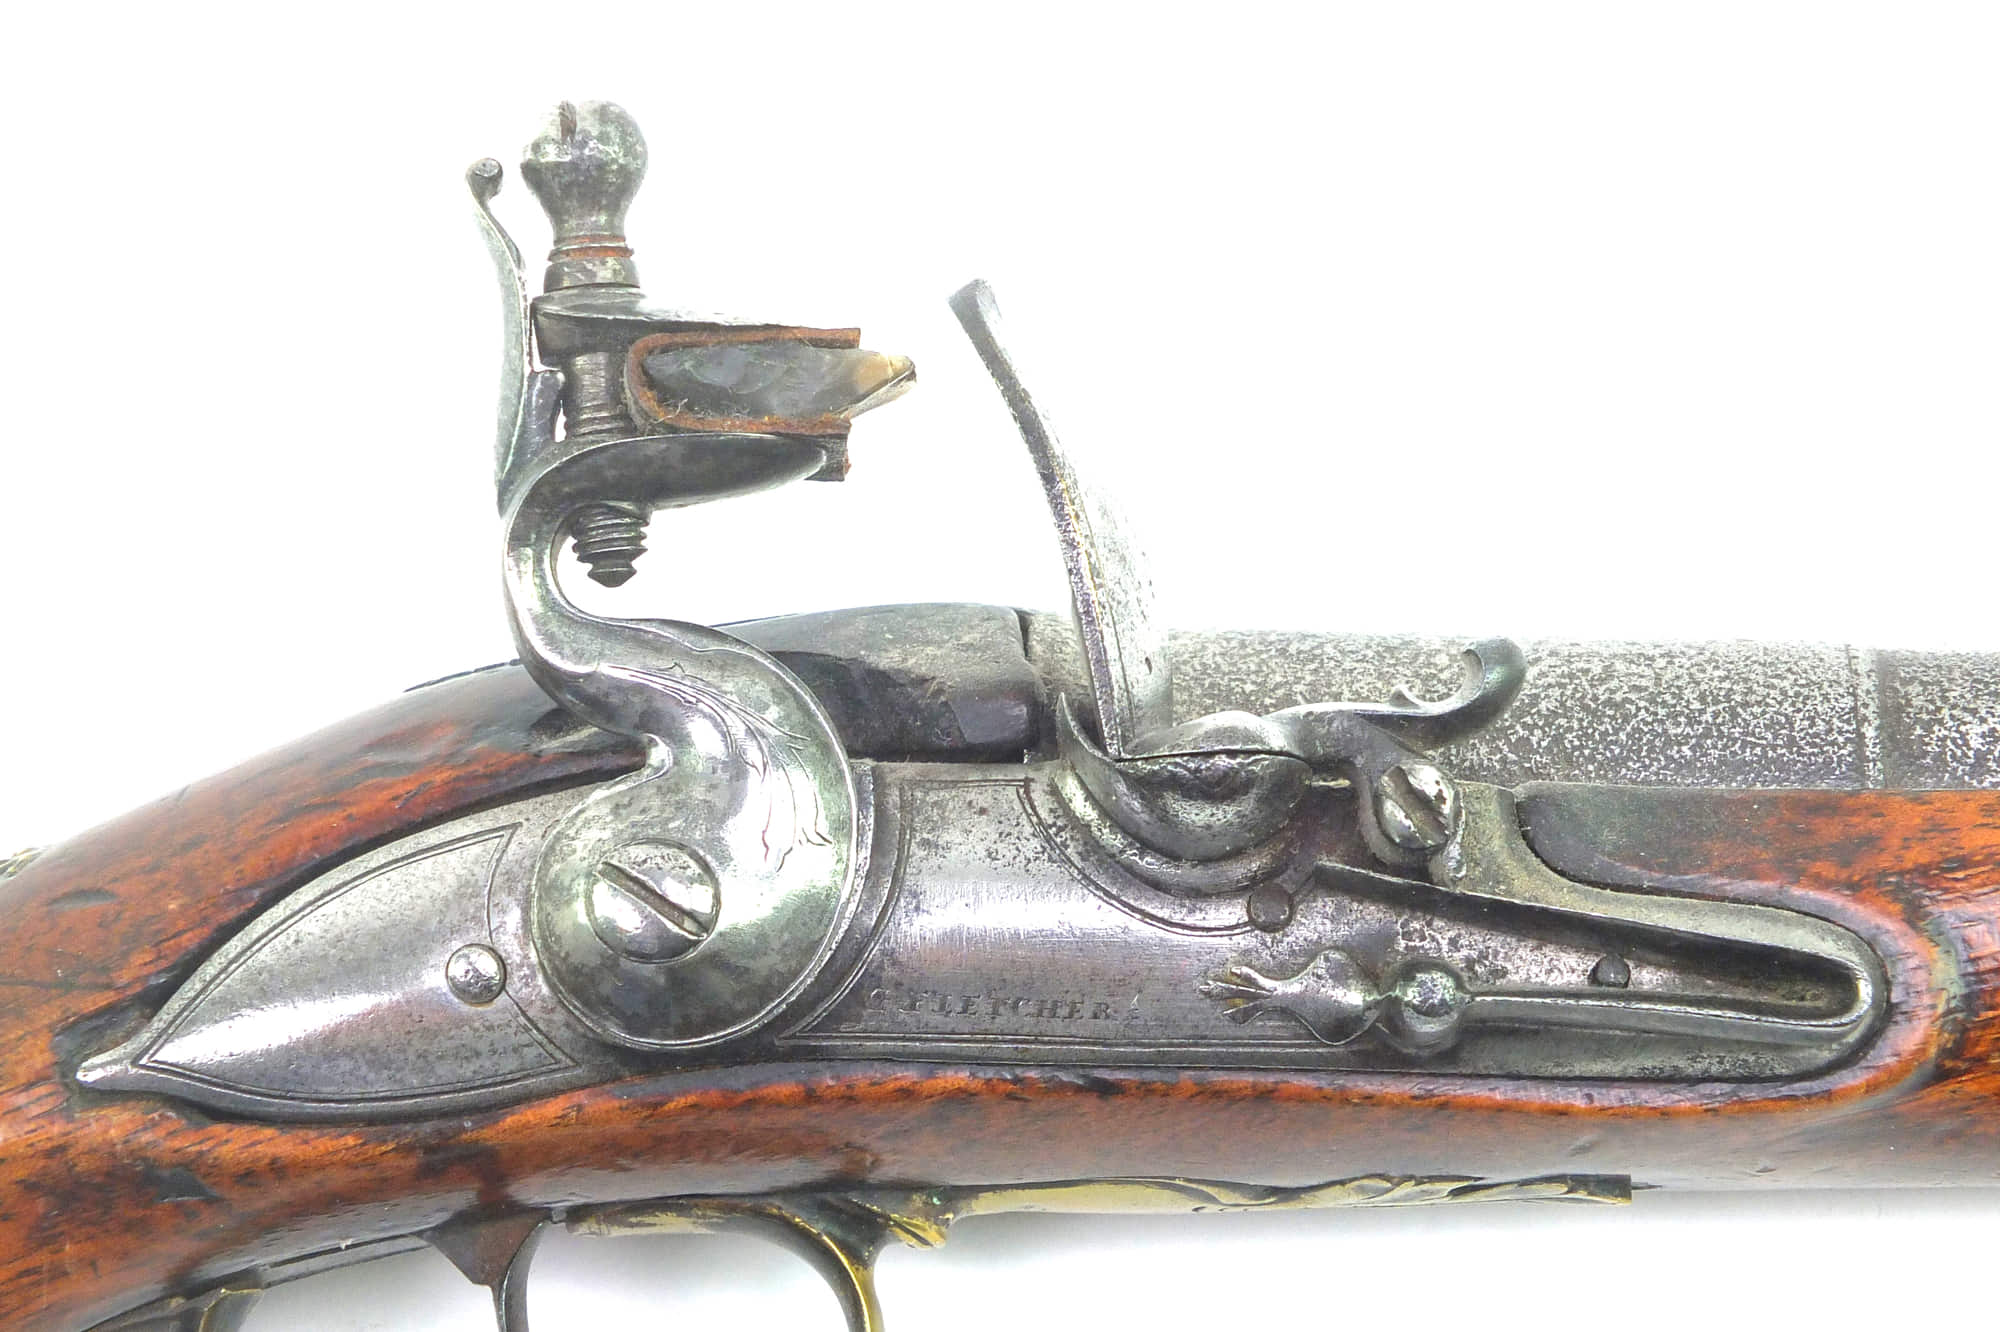 File:Flintlock Pistol with Case and Accessories MET LC-37 154 3a g